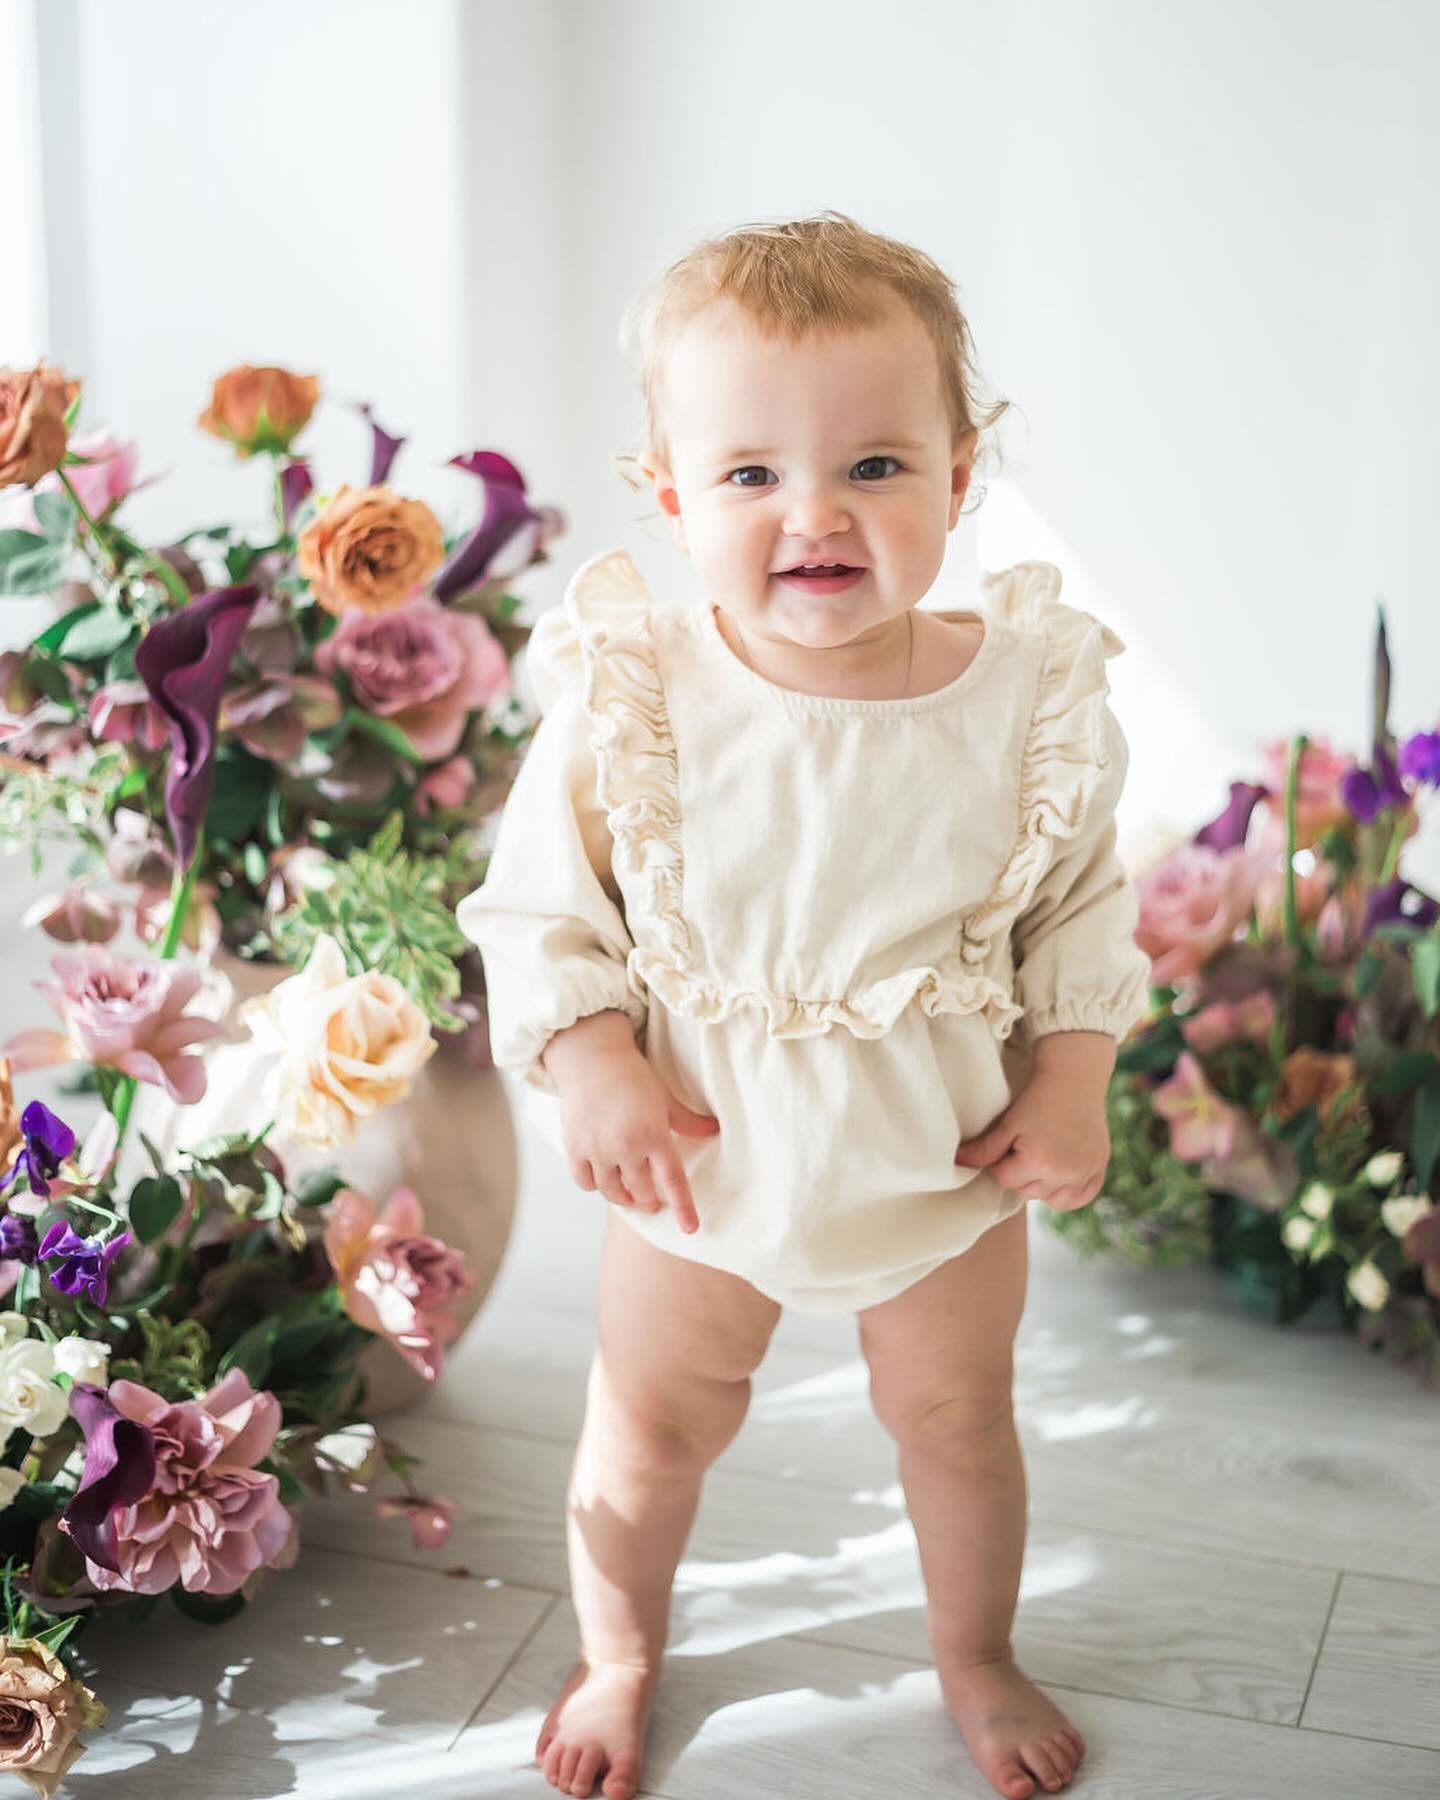 🌸 Babies in Bloom 🌸
.
📷 @kimberlybalsonphotography
💐 @heartytales